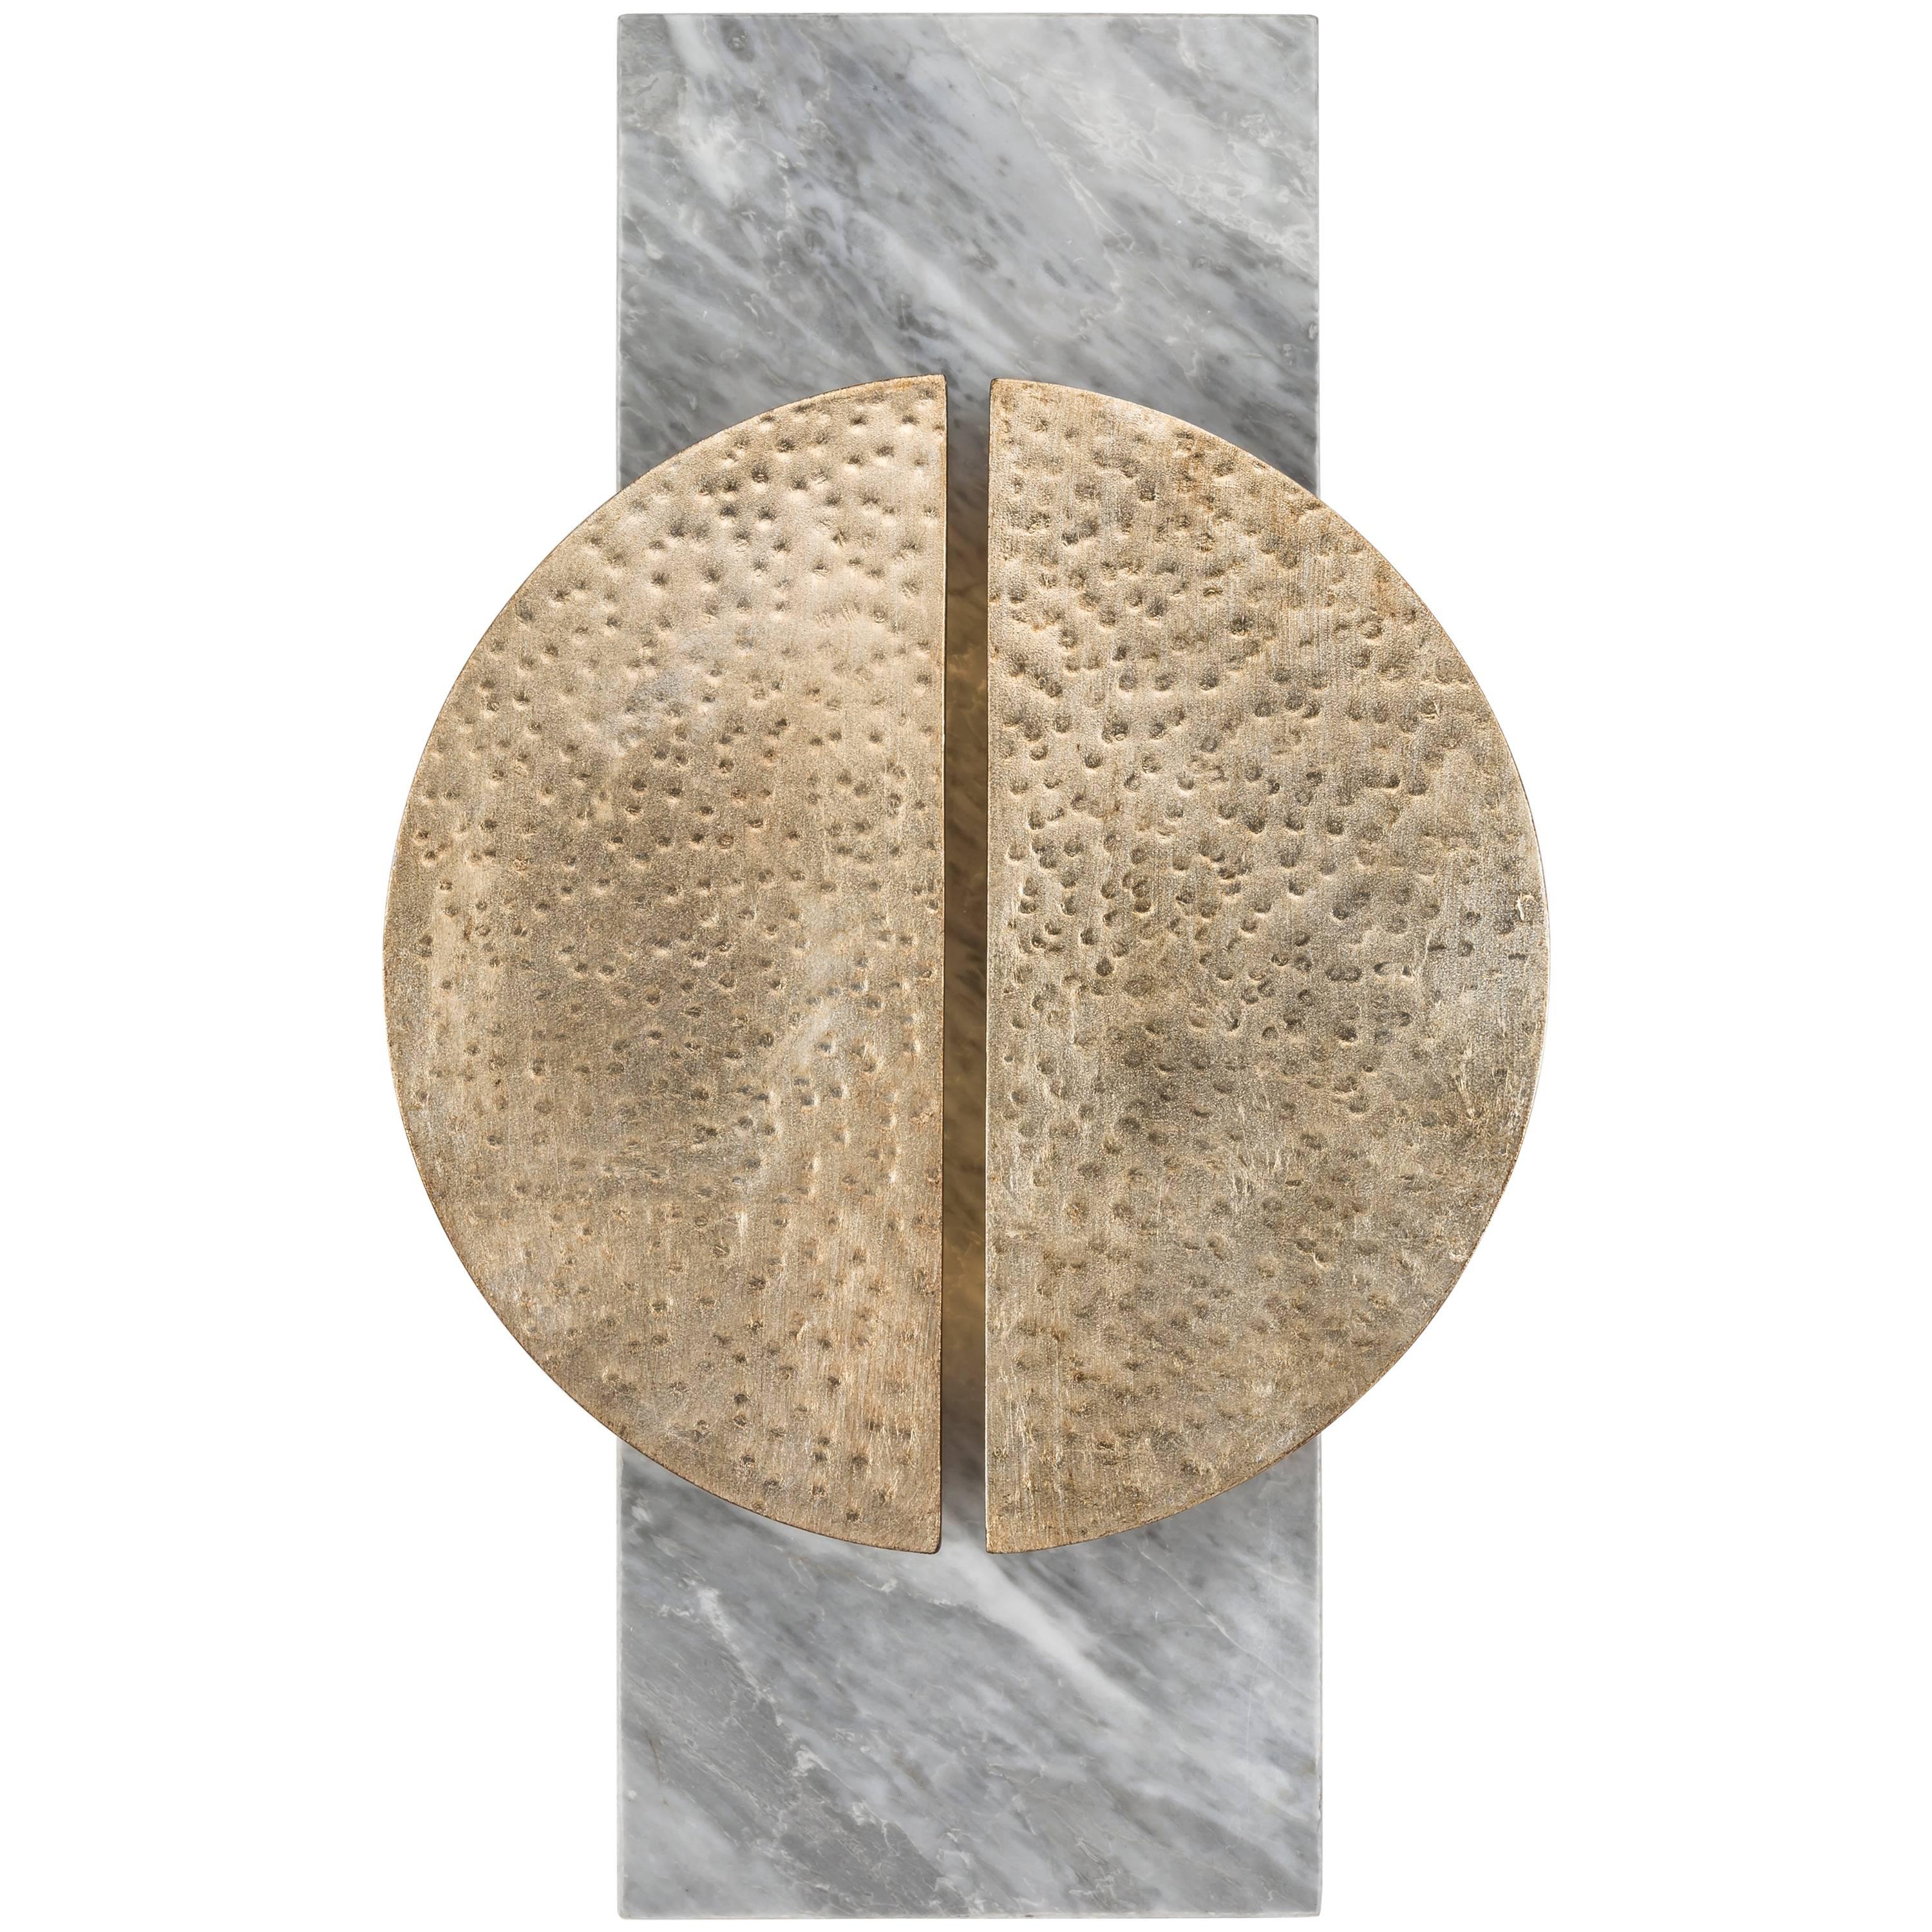 HALO SCONCE - Modern Hand-Forged Leafing Sconce on a Carrara Marble Plate For Sale